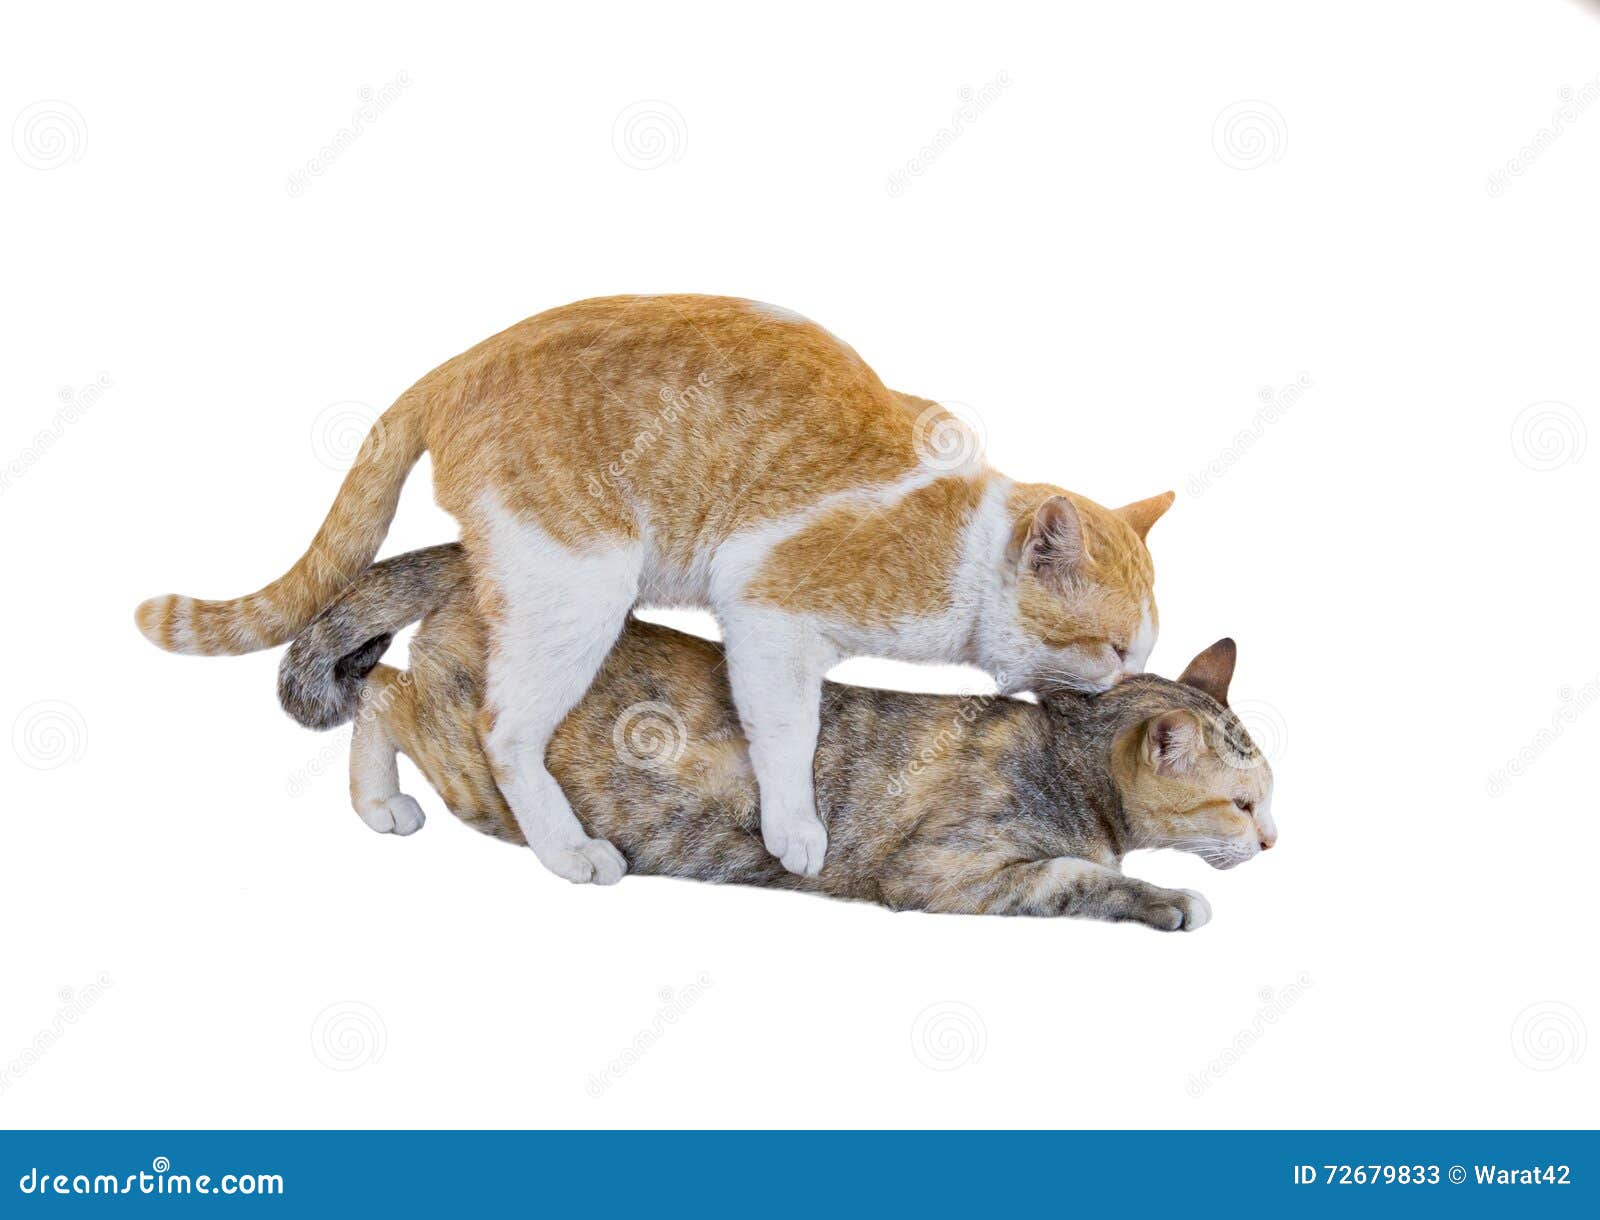 Two Cat Mating on Background Stock Image - Image of pair, environment:  72679833